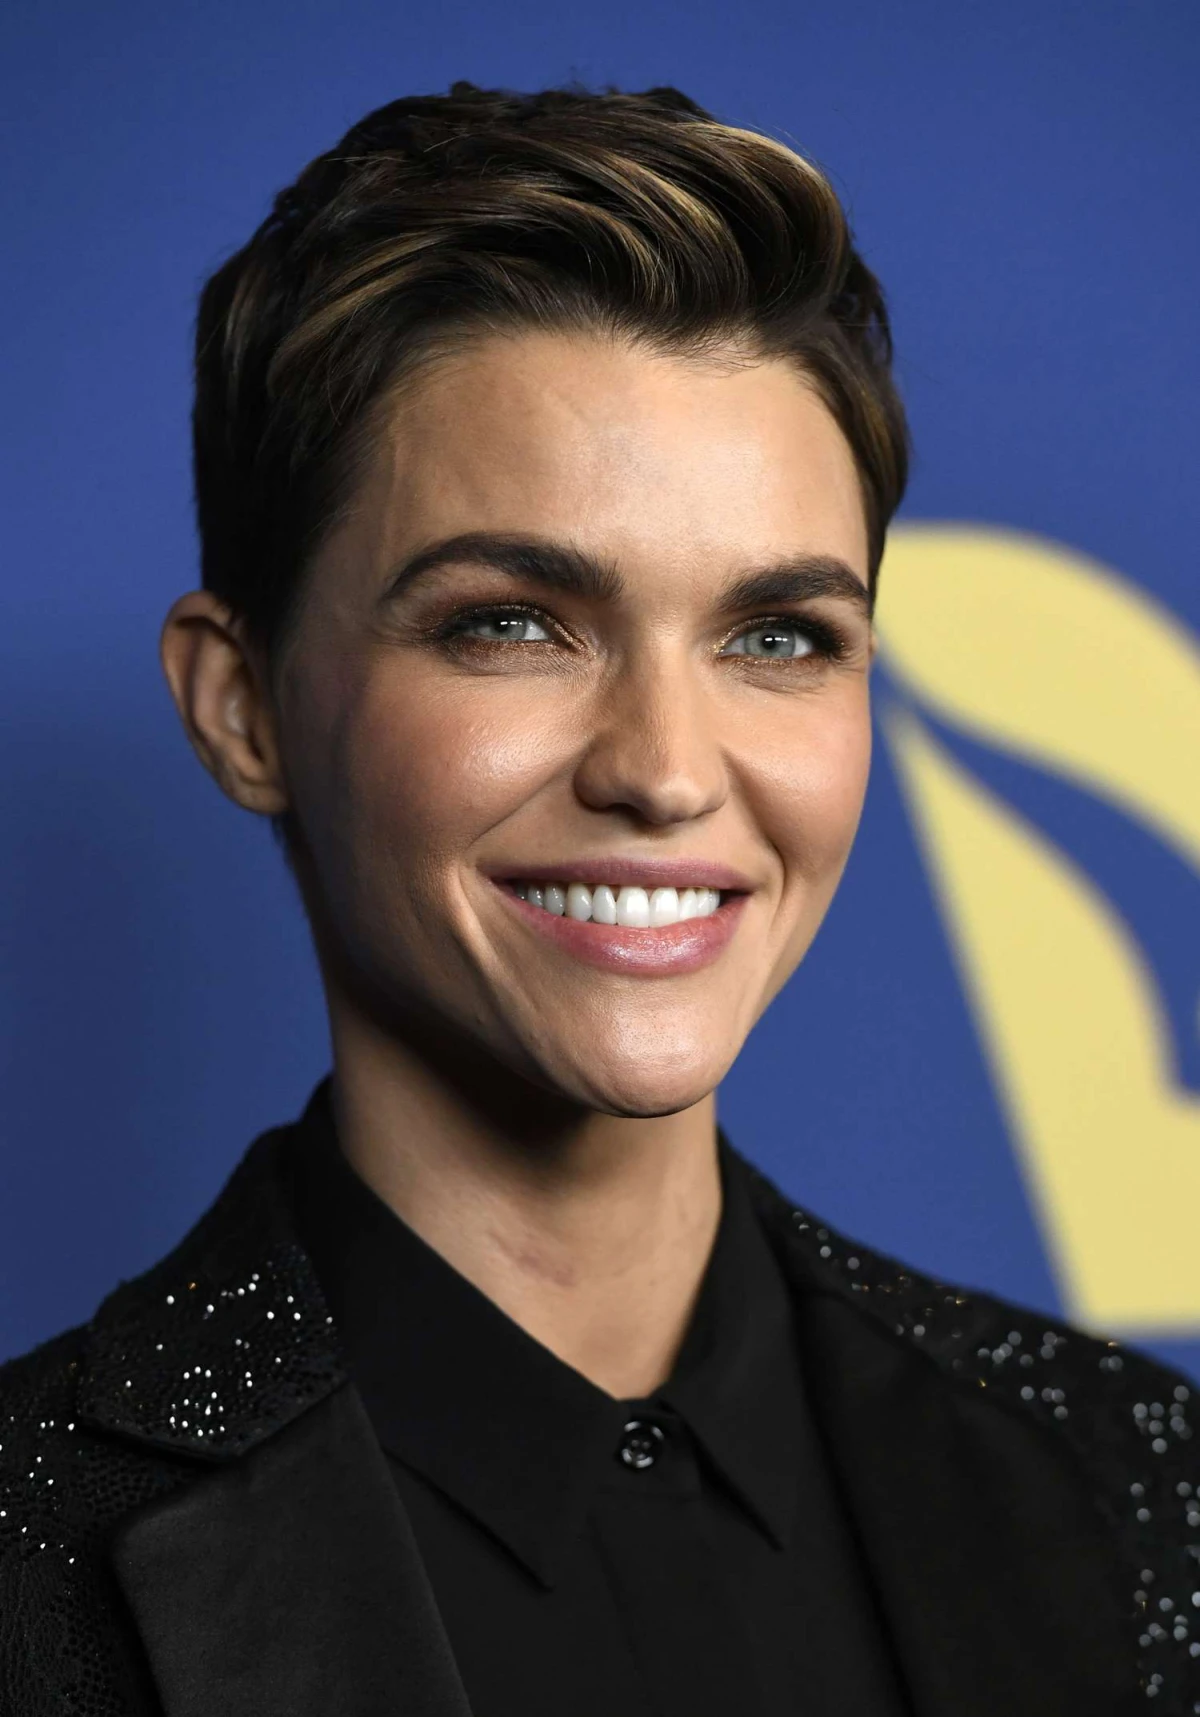 tapered short haircut ruby rose tapered haircut